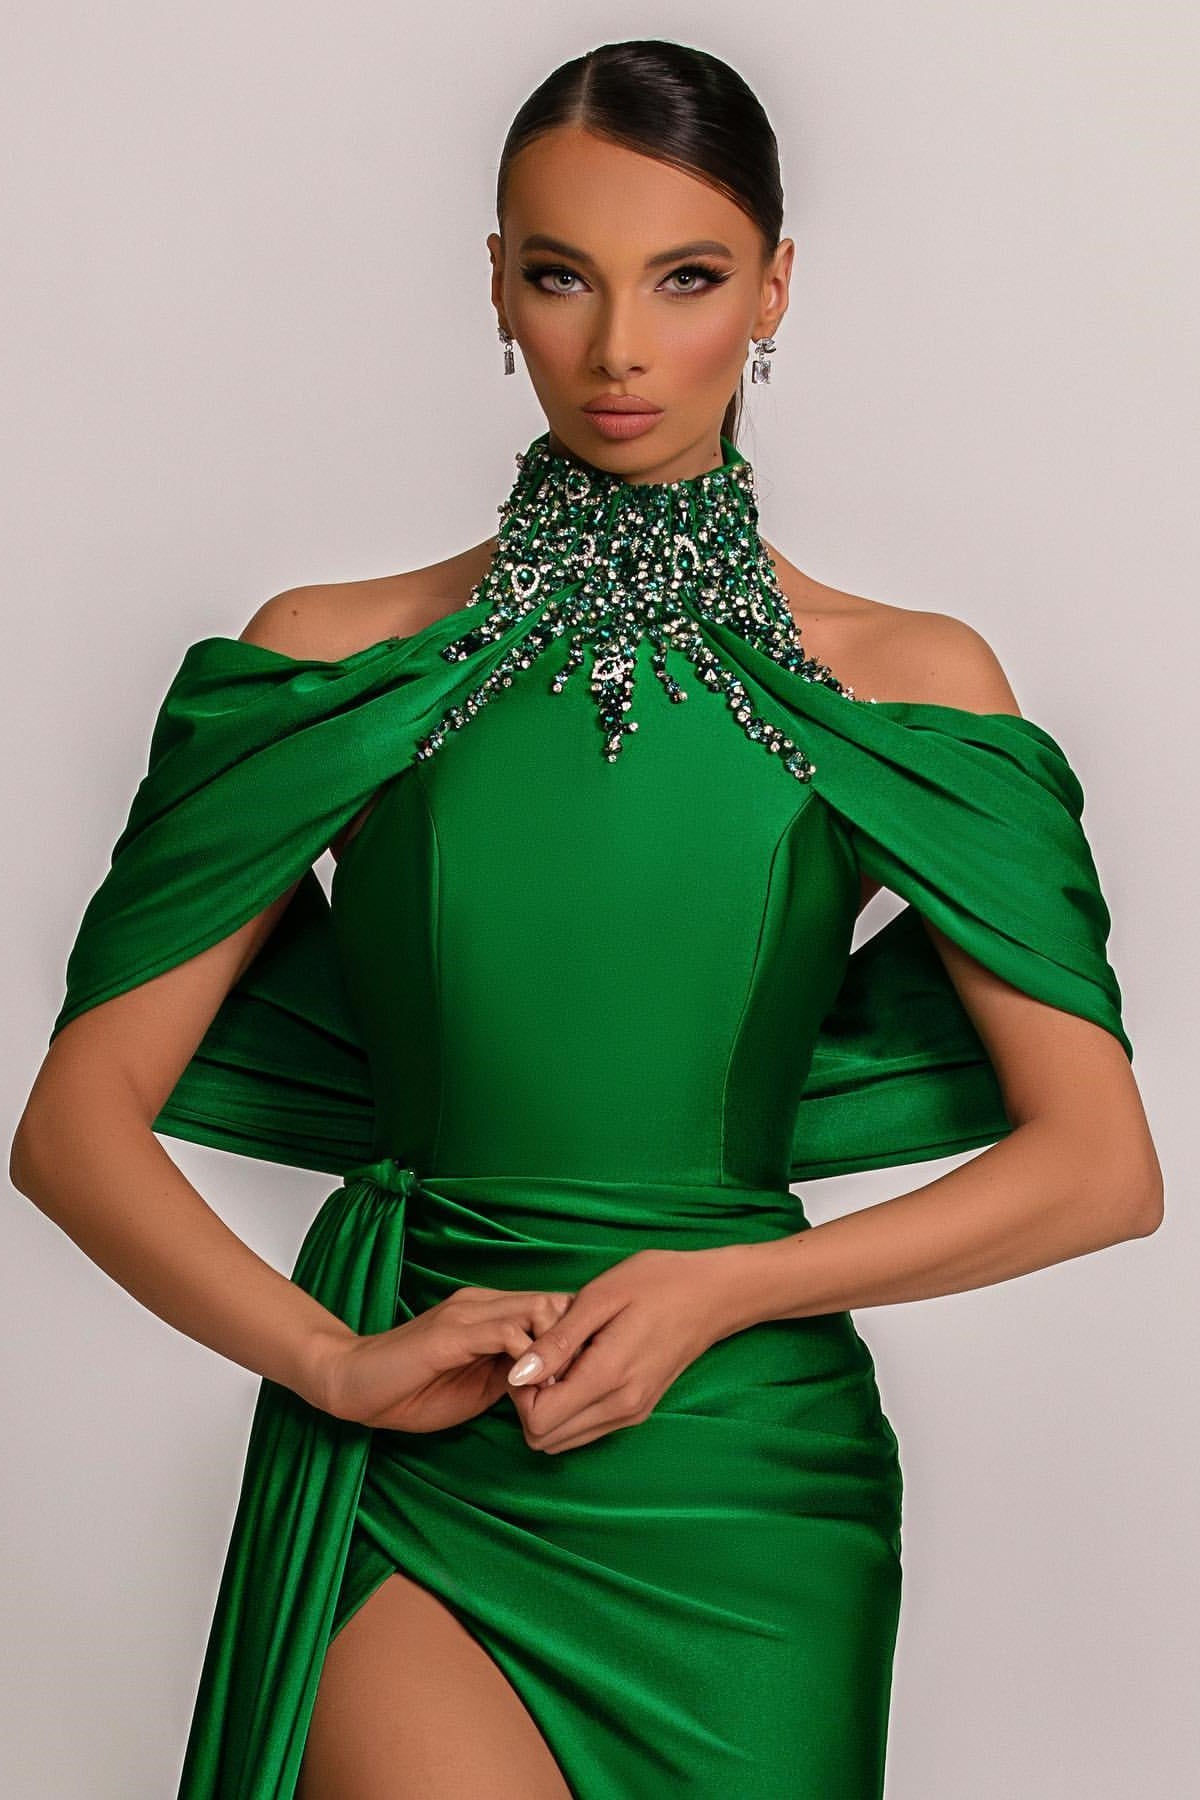 Classic Emerald Green Mermaid Prom Dress with Beads-Occasion Dress-BallBride